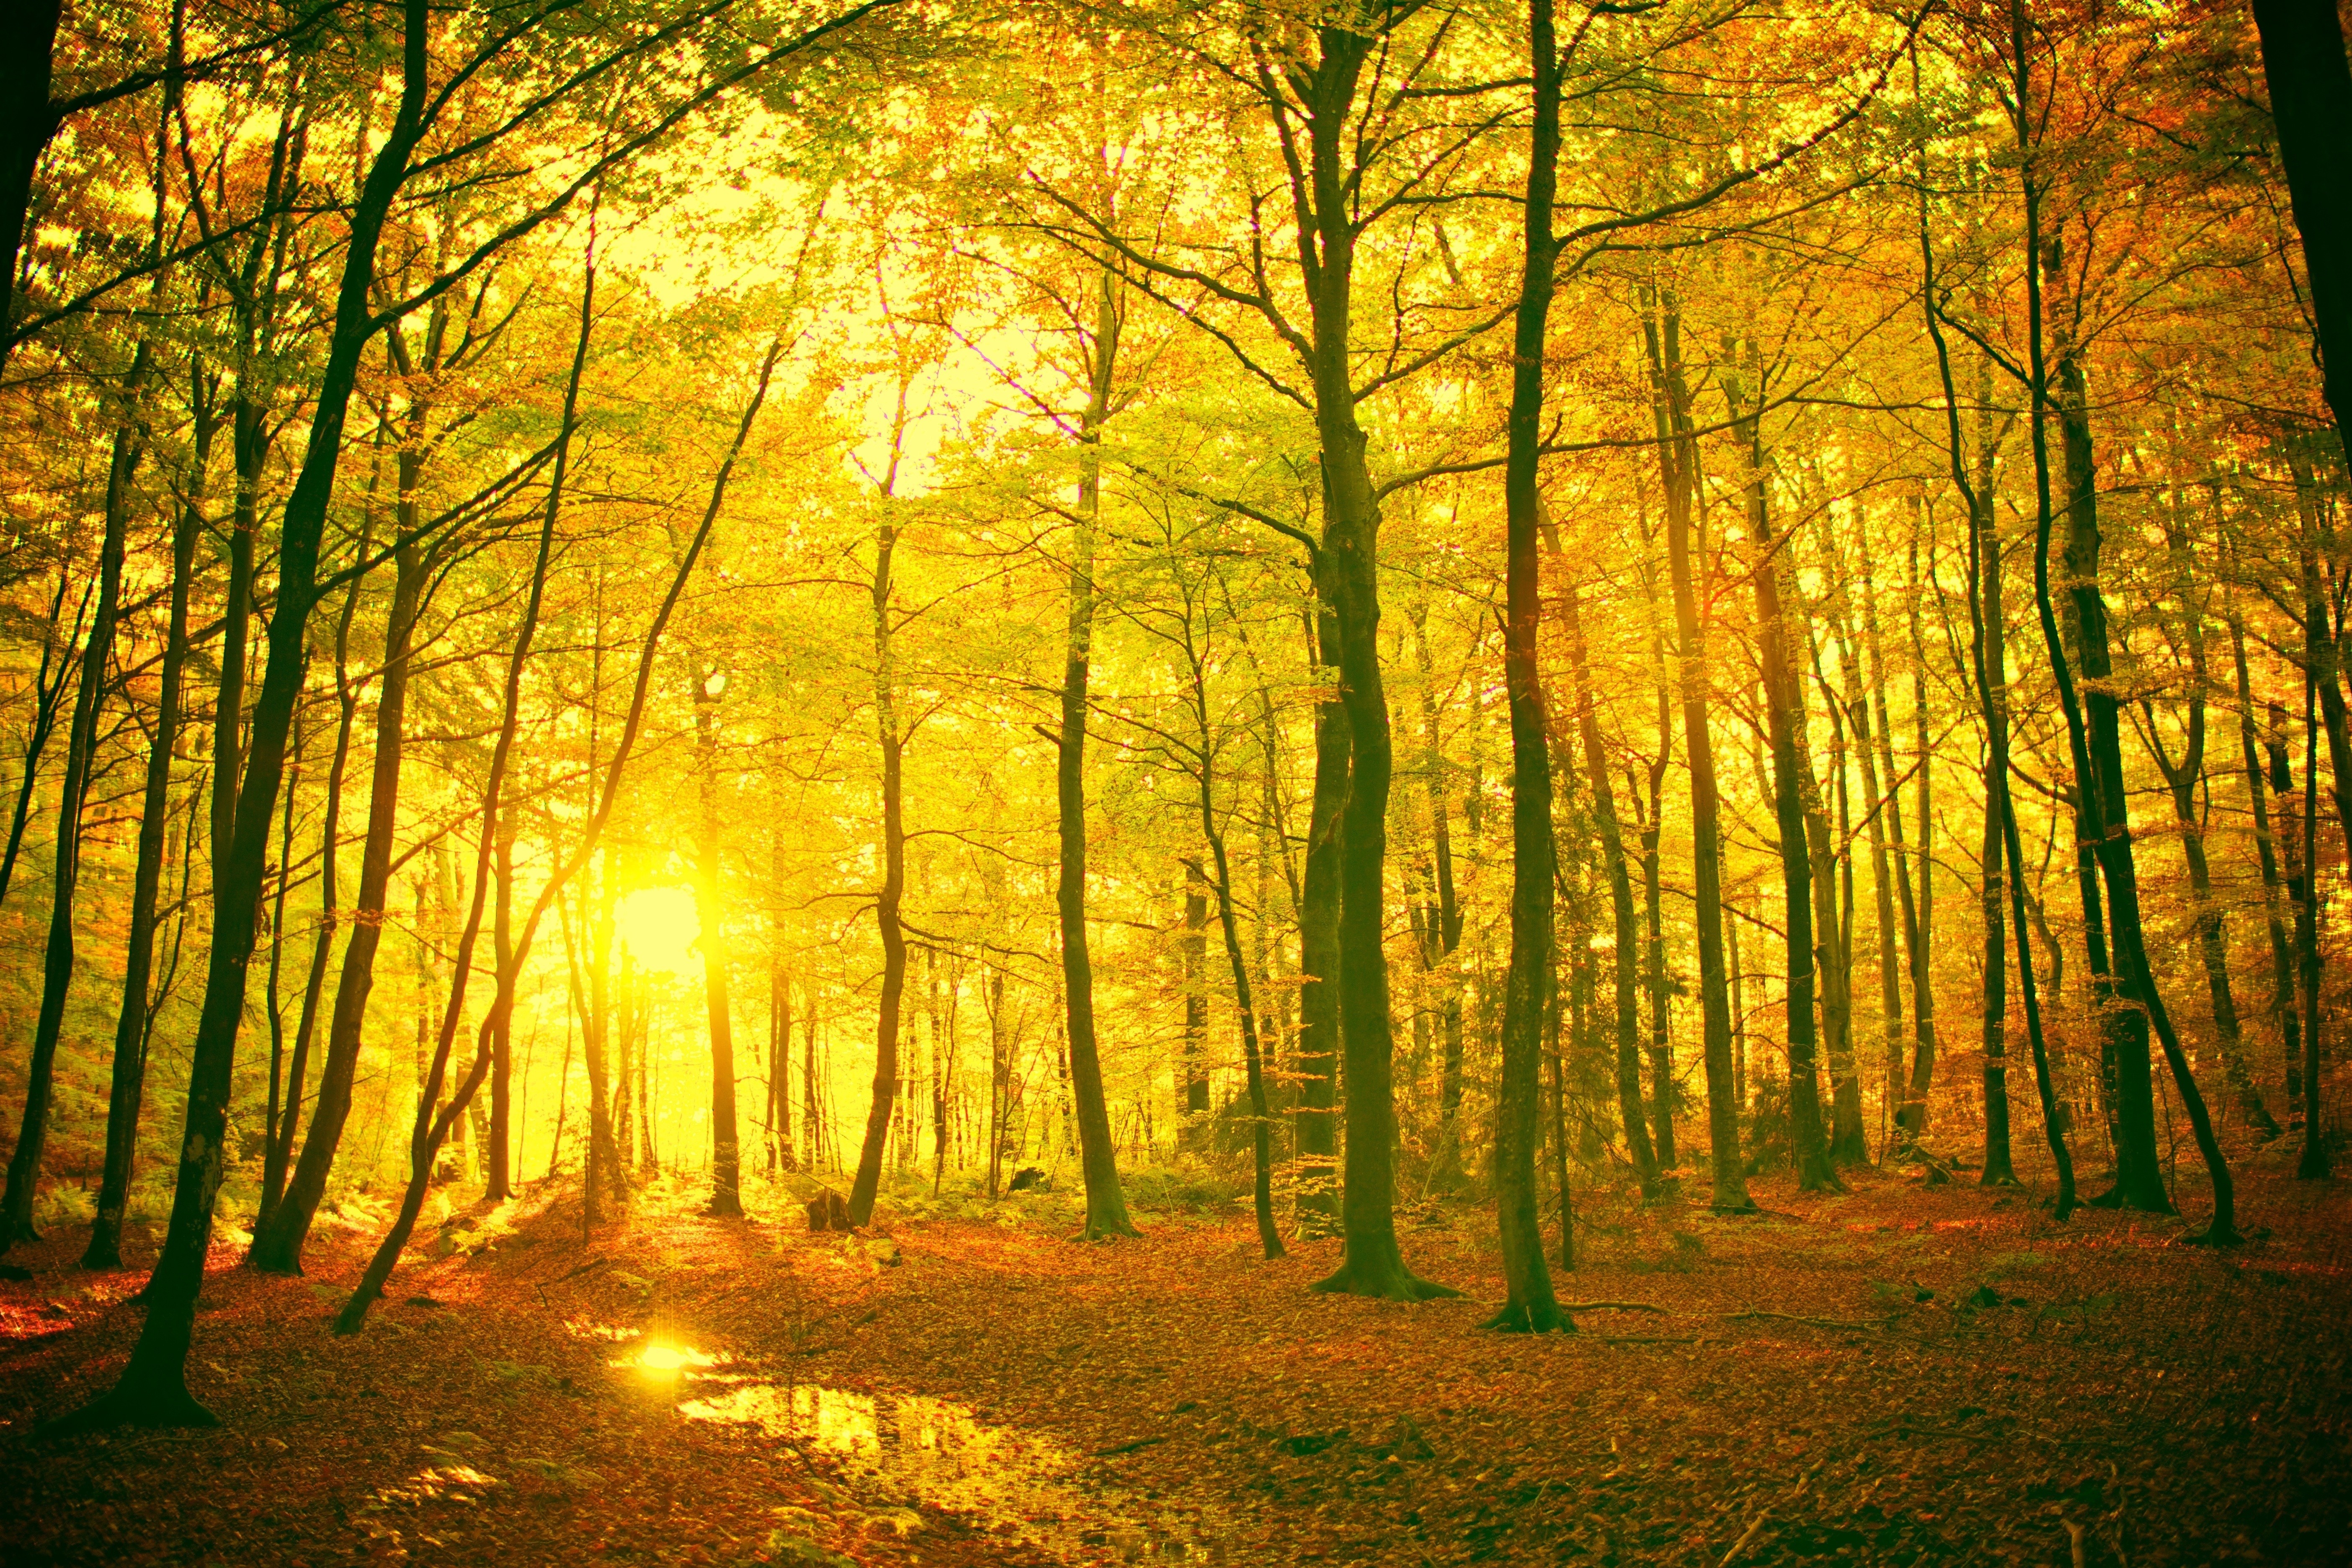 General 5616x3744 forest trees nature sunlight yellow fall outdoors plants